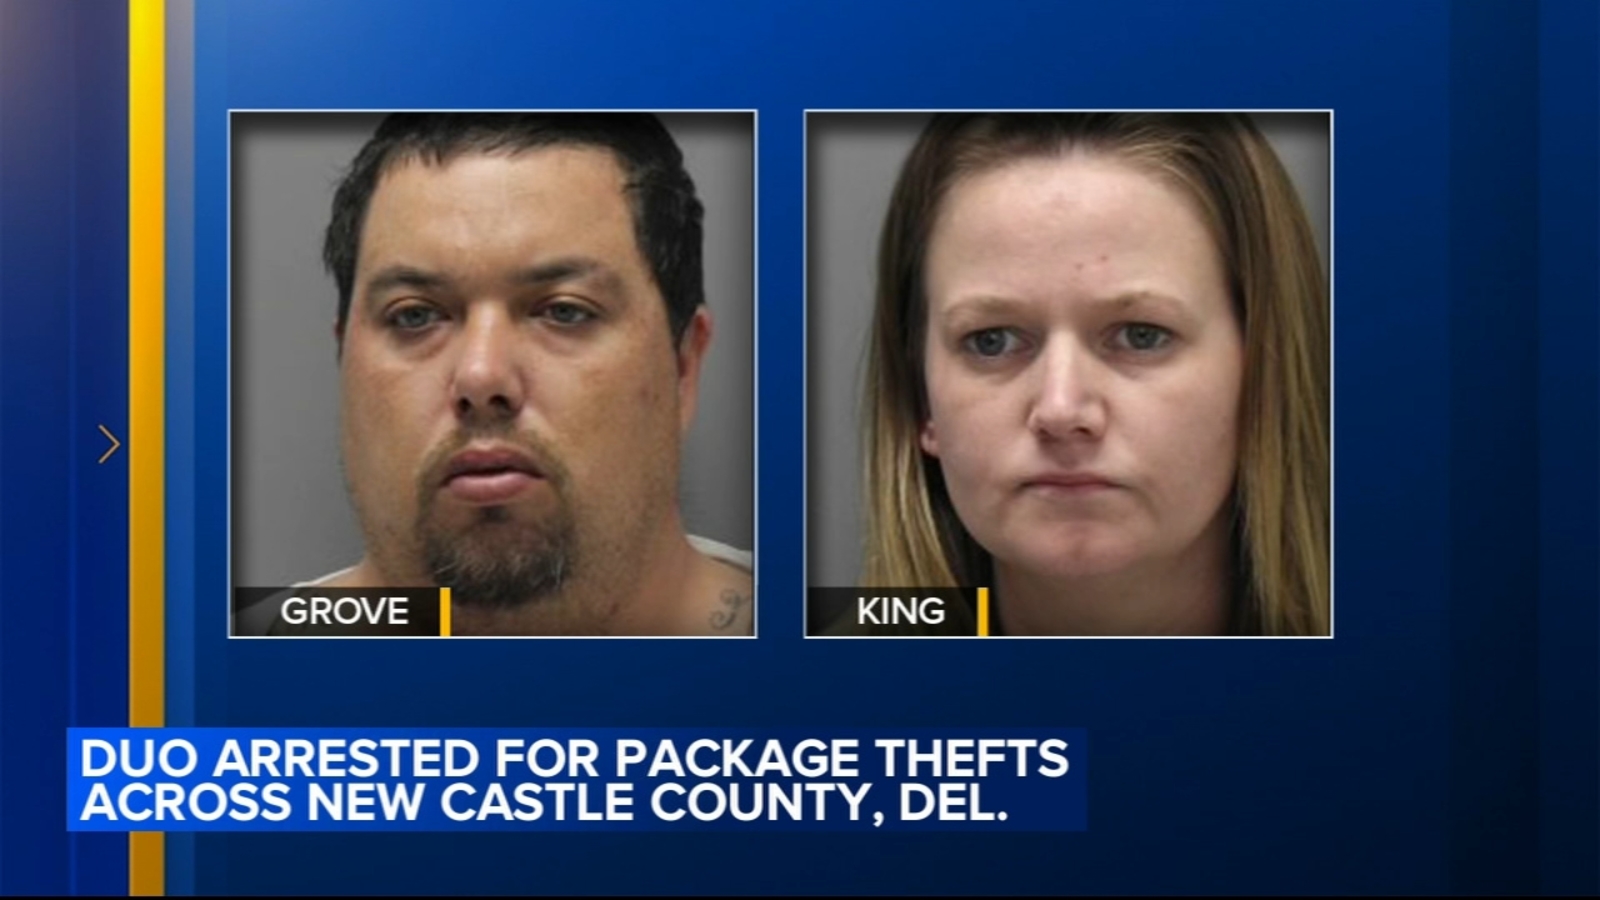 New Castle package thefts: Kevin Grove, Kimberly King arrested by Delaware State Police [Video]